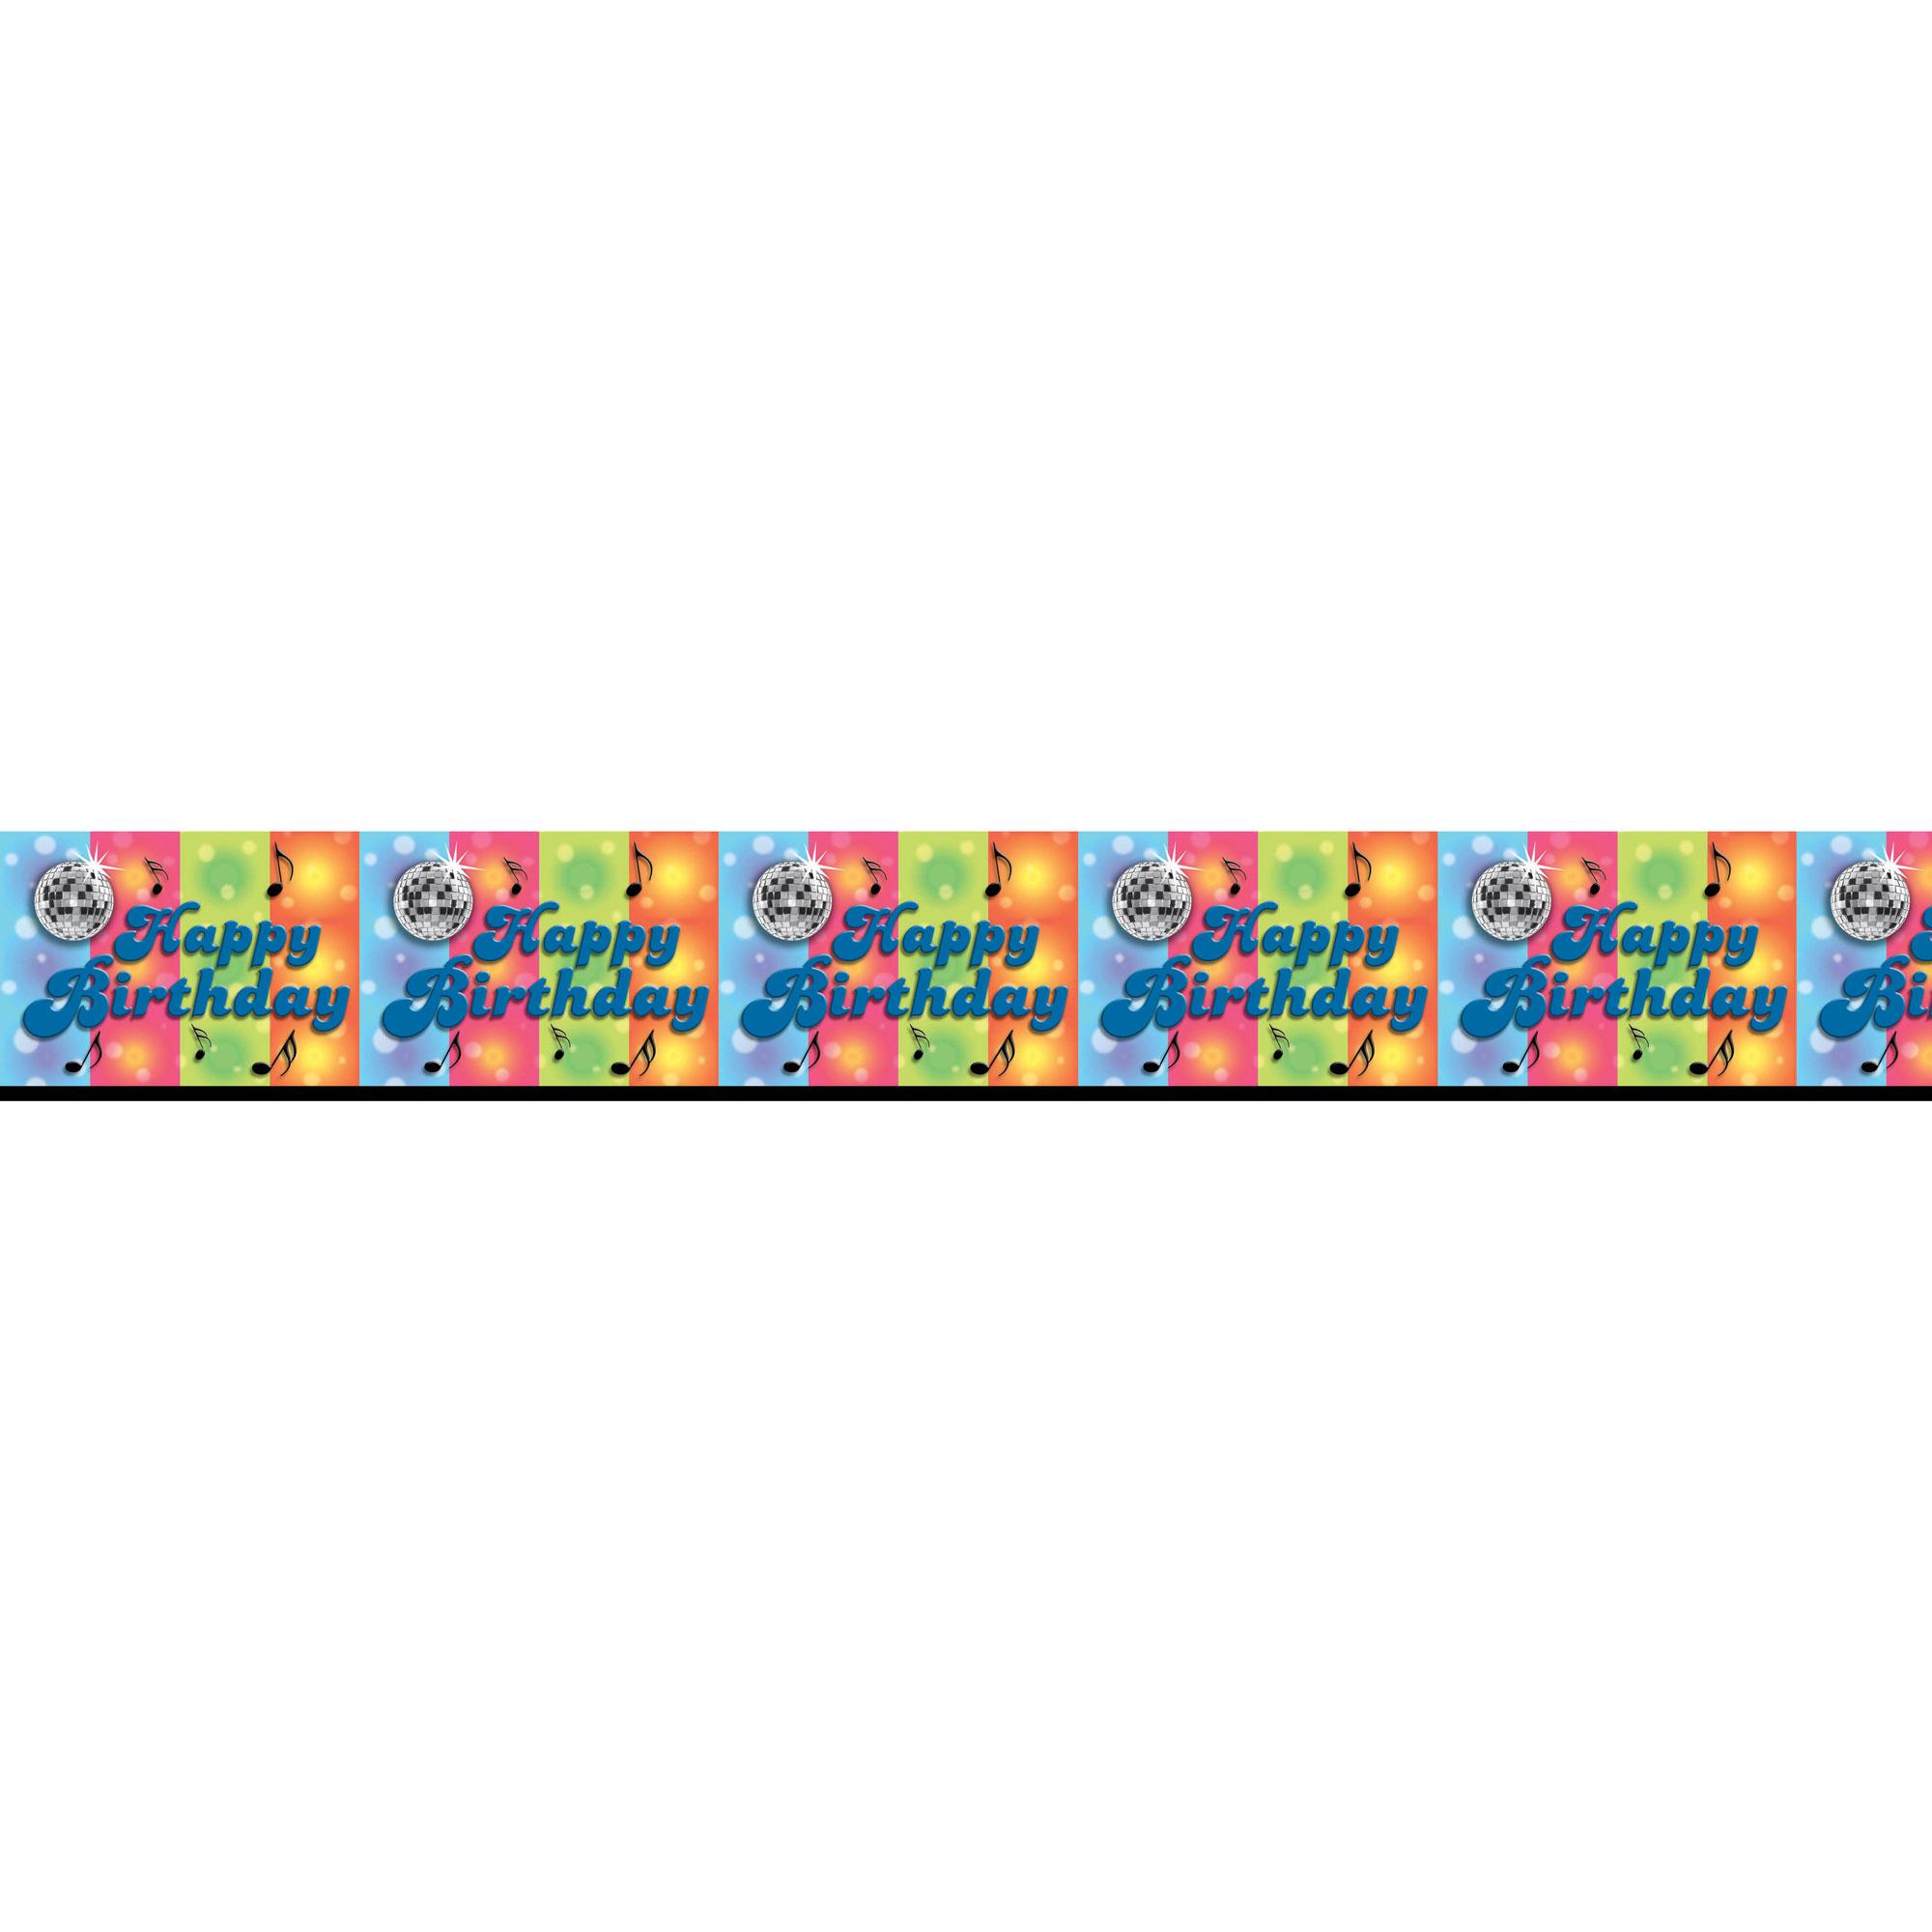 Disco Happy Birthday Banner Roll 40ft x 18in